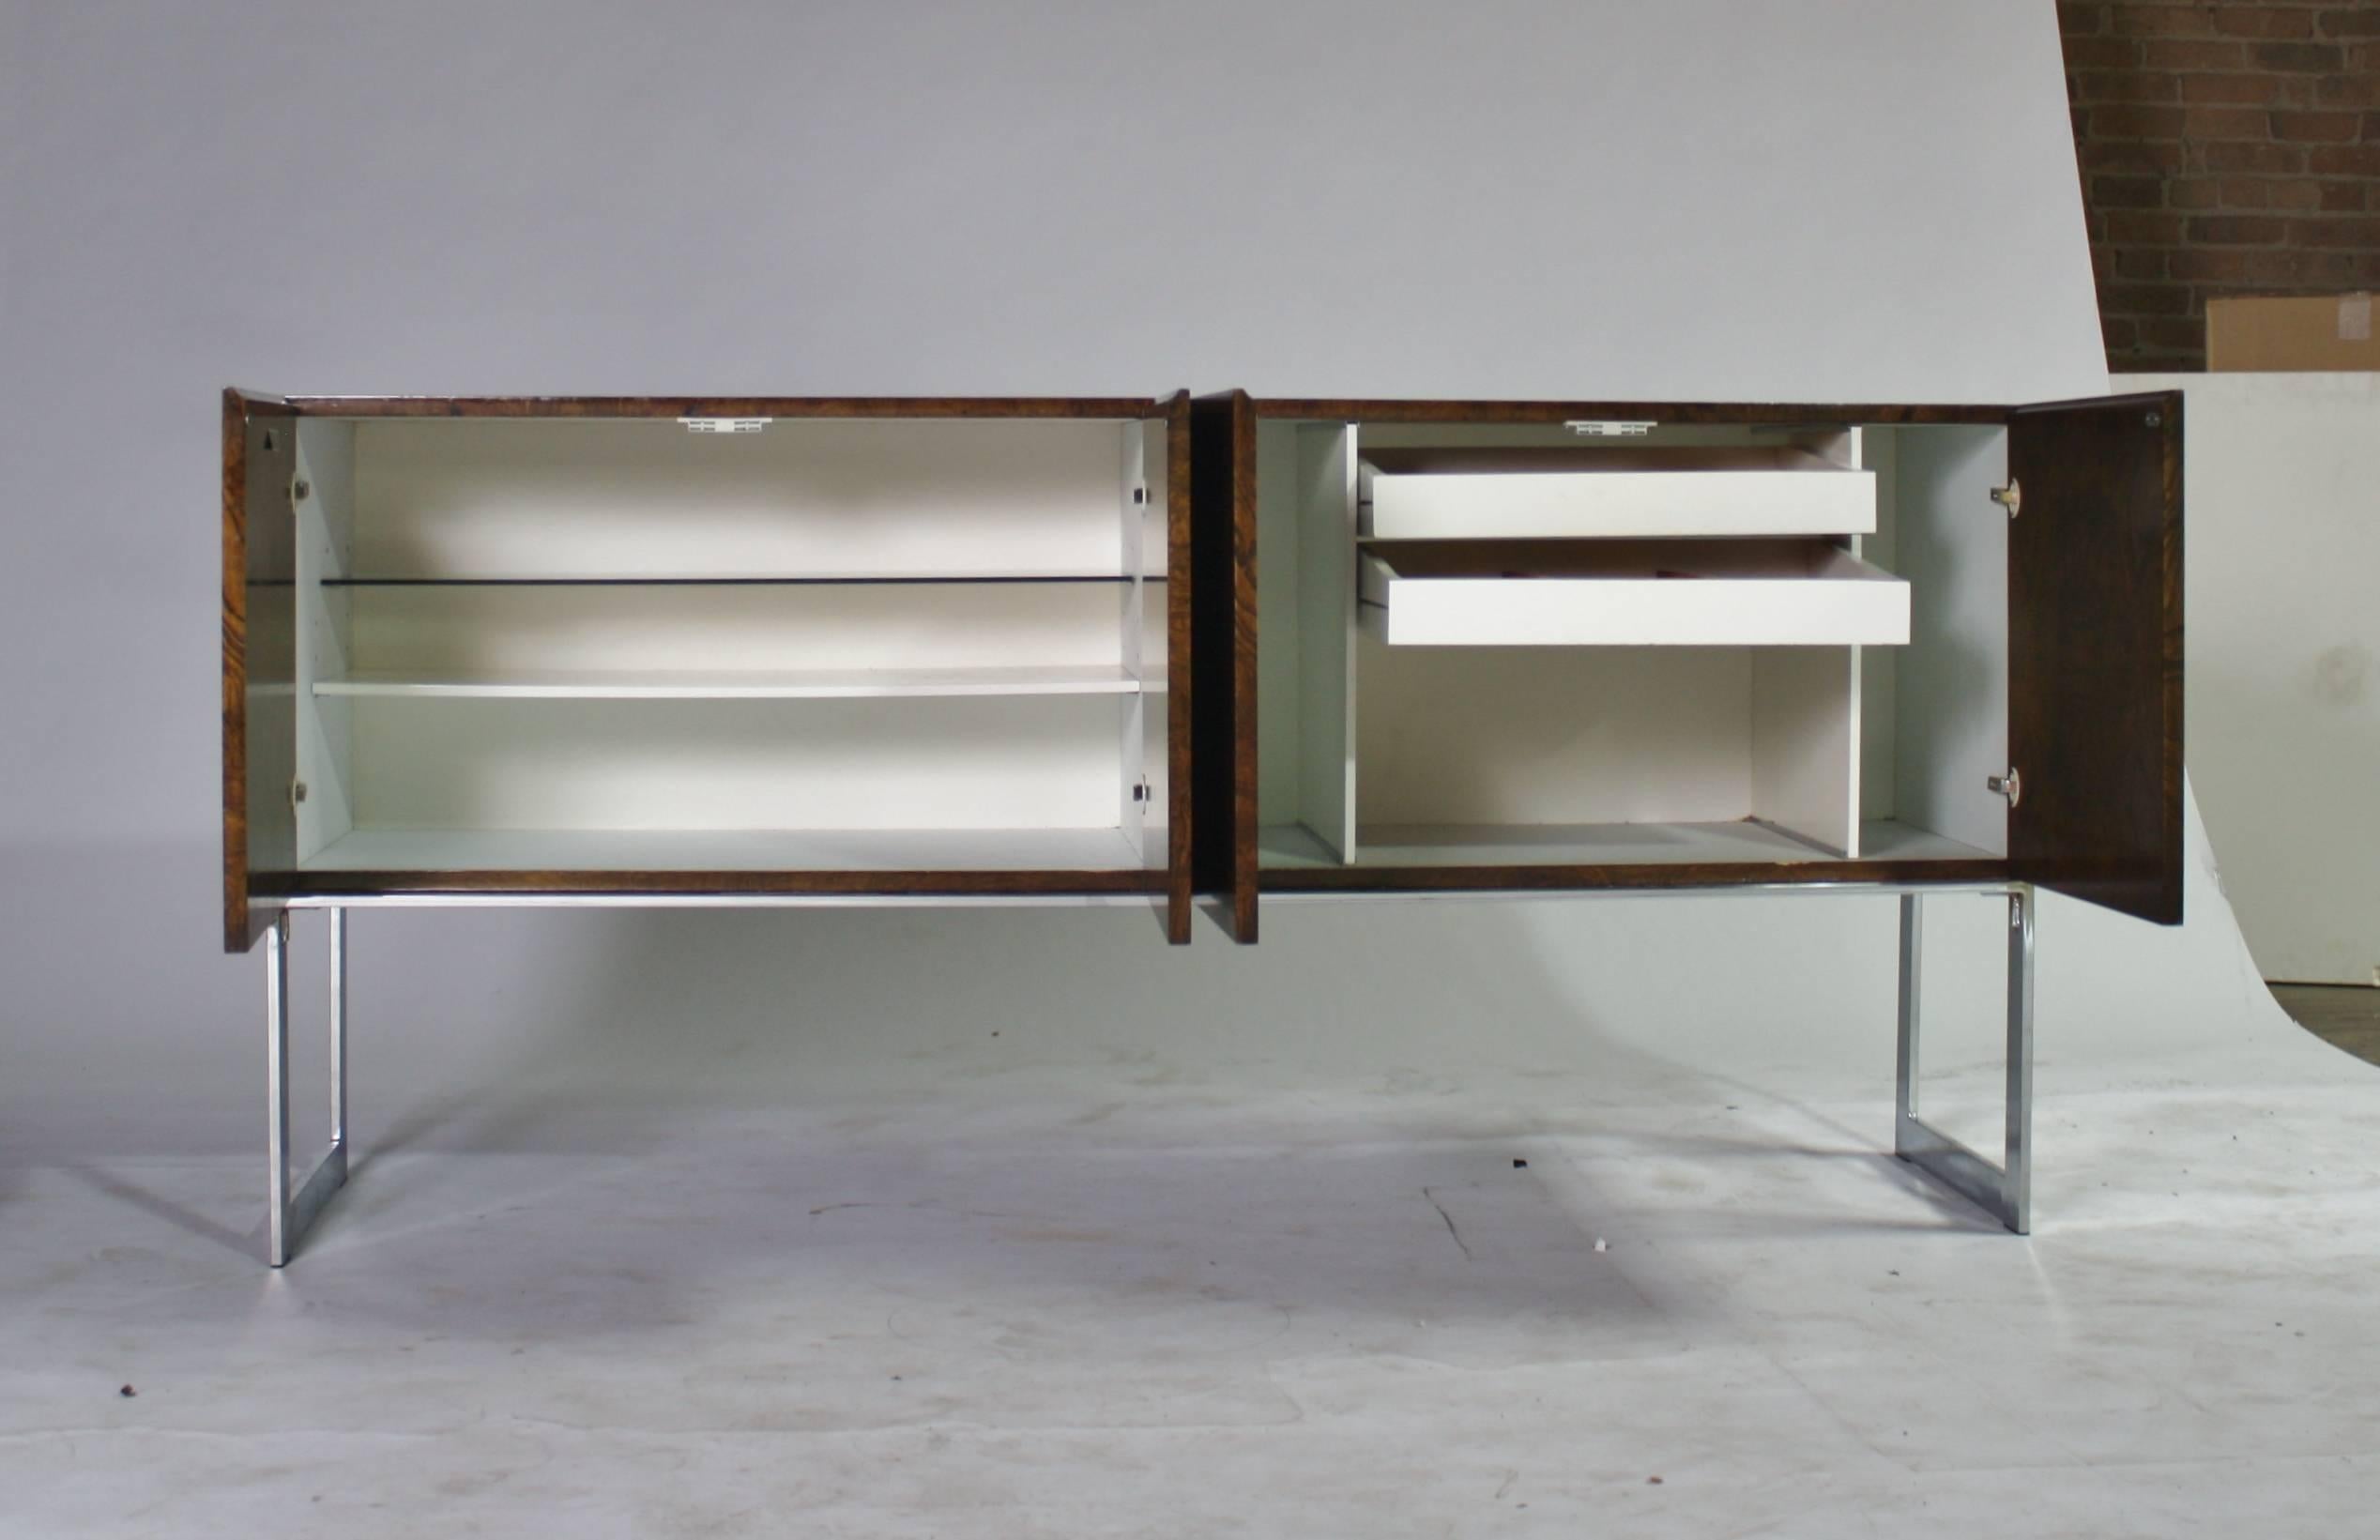 Signed Milo Baughman sideboard or credenza labelled, Thayer Coggin in the rare walnut burl wood floating on chrome legs. Four cabinet doors open to a white wood interior with two gold felt lined cutlery drawers on the right and shelving on the left